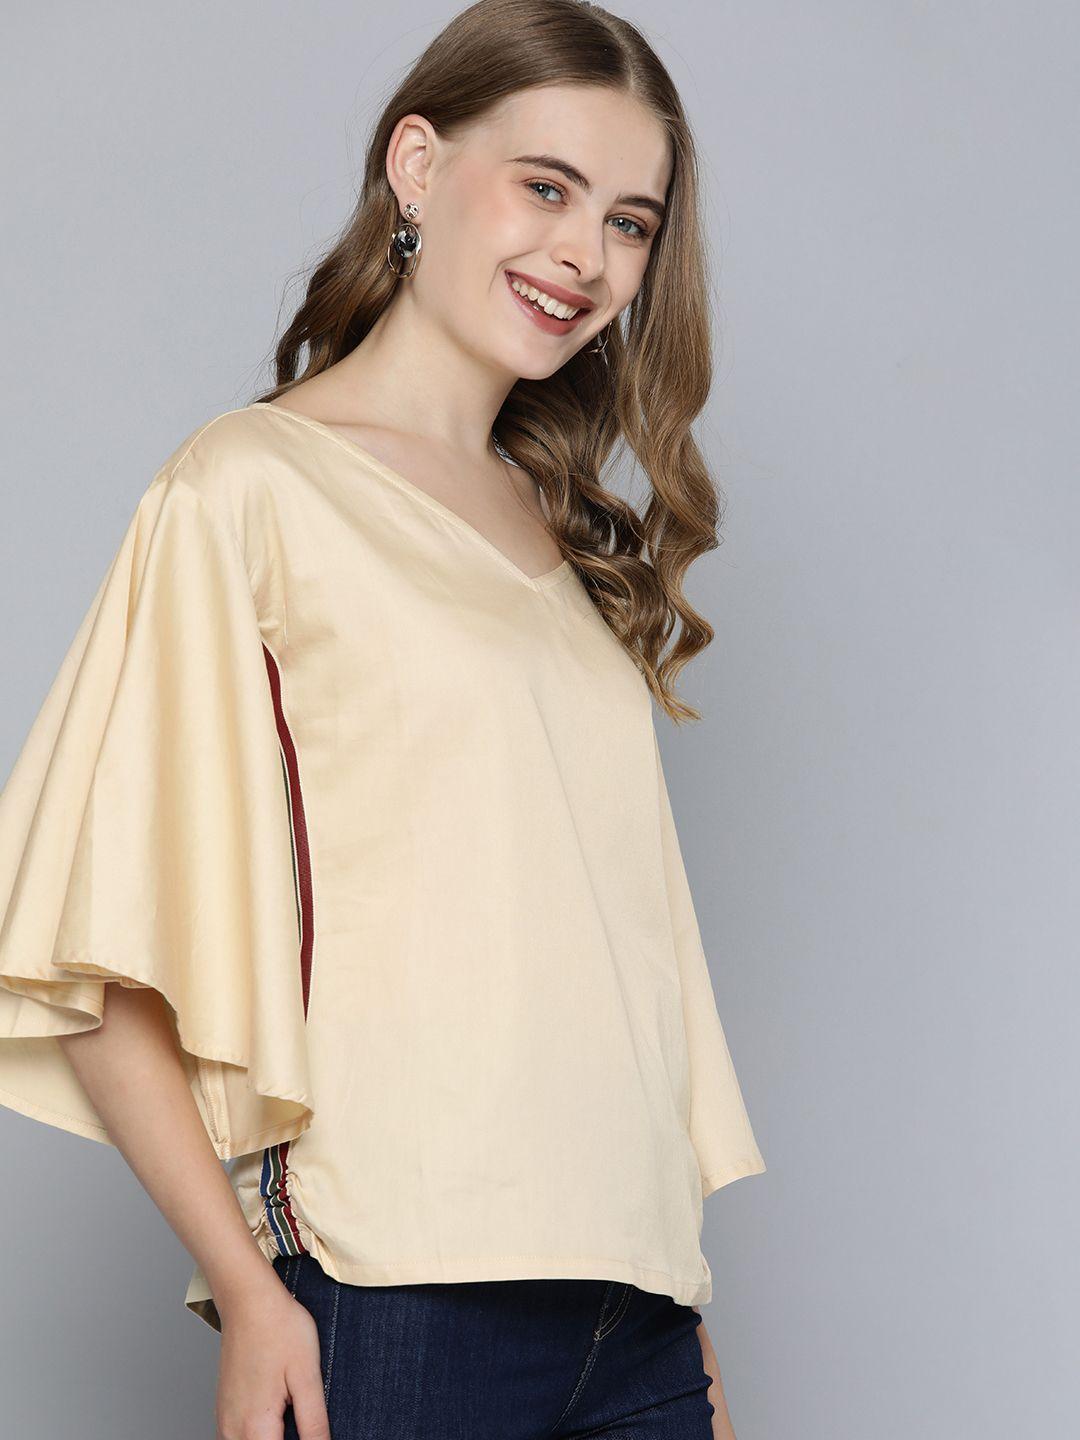 mast & harbour v-neck flutter sleeves pure cotton top with side taping detail